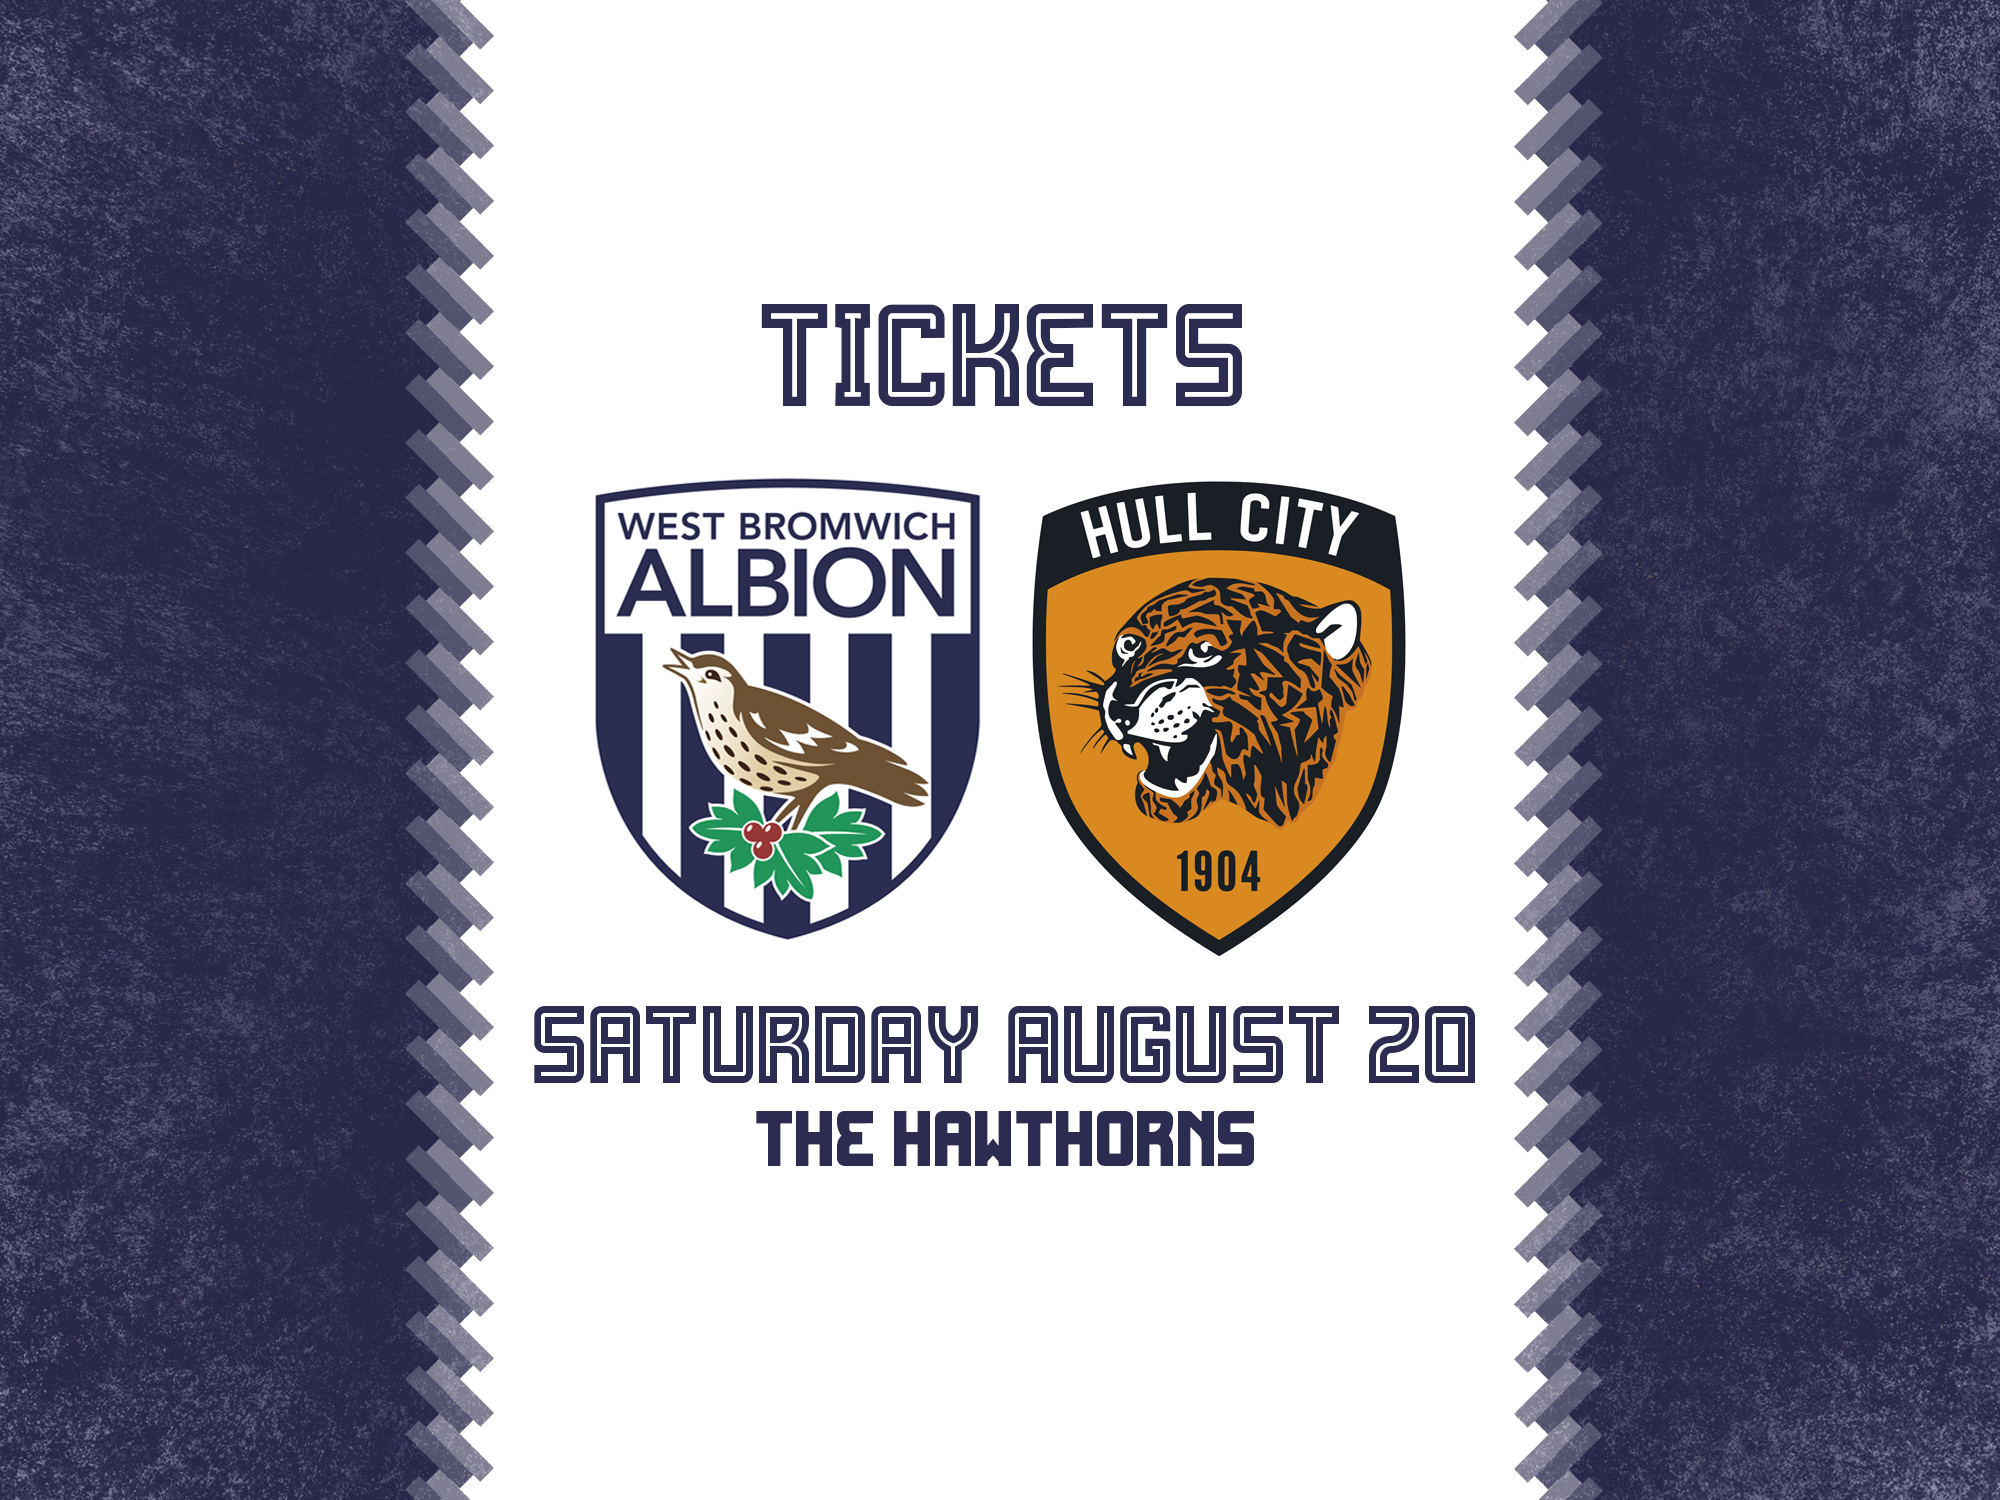 Tickets are now on sale for Albion's game against Hull City